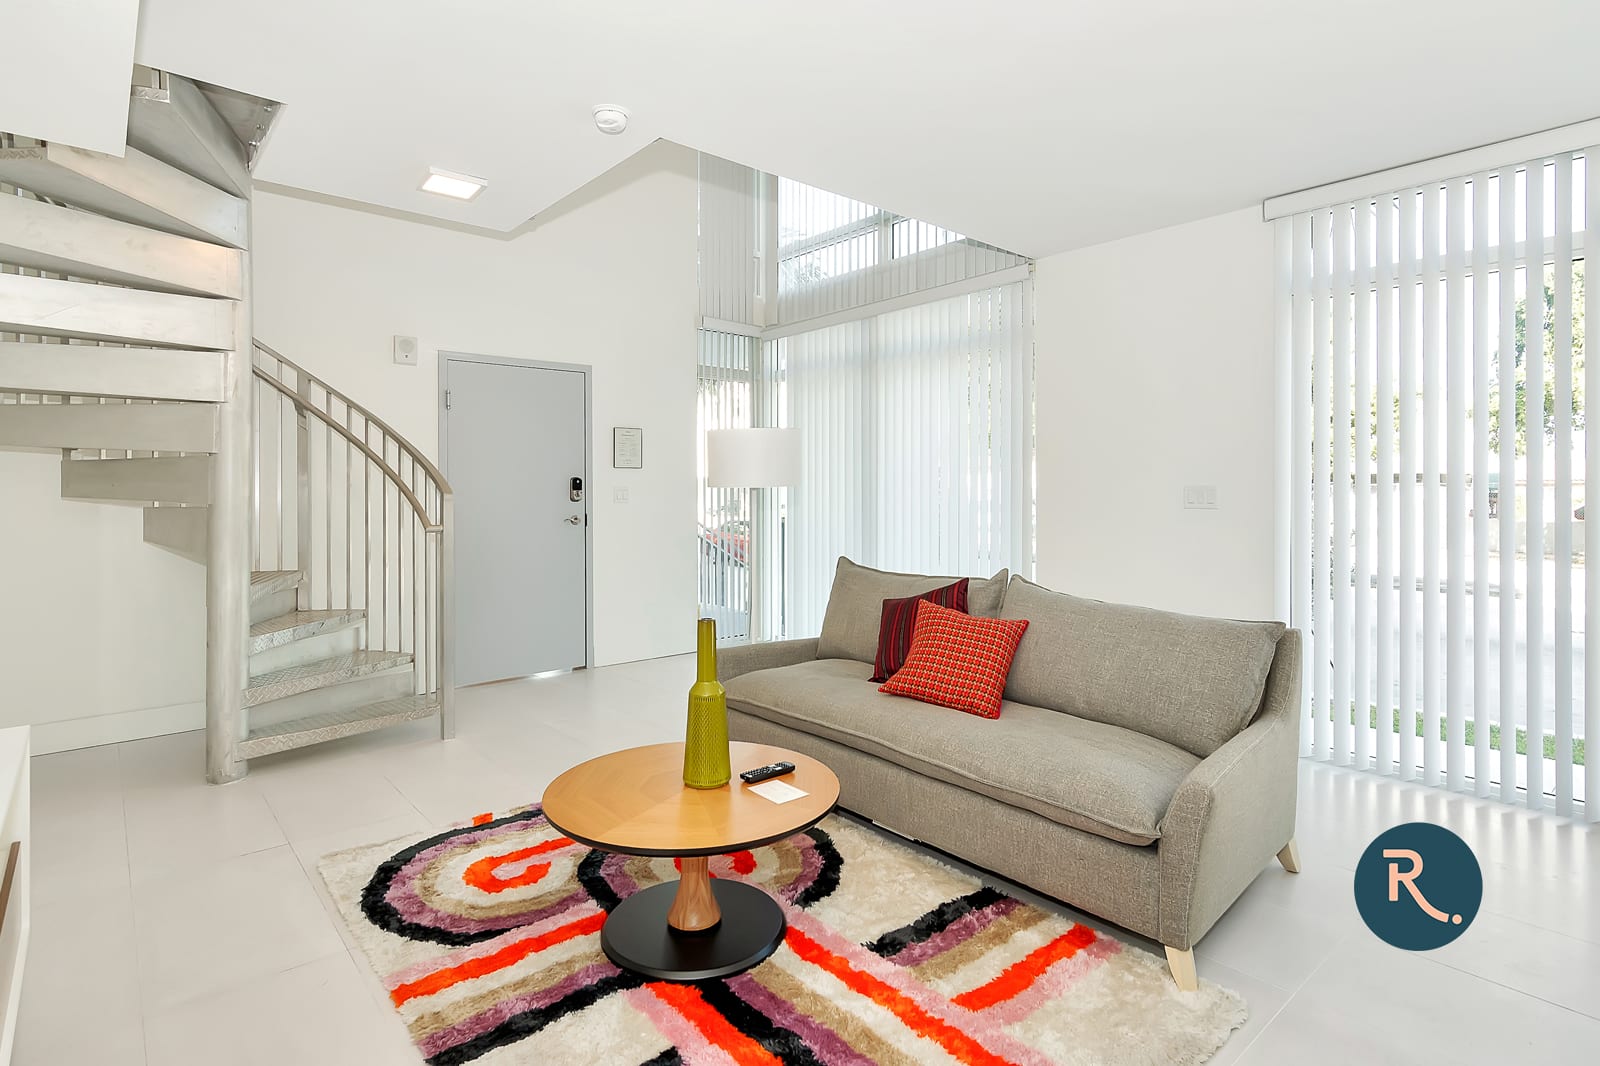 Property Image 1 - Grove 27 | Coconut Grove | Free parking | 1 Bed 1.5 Bath